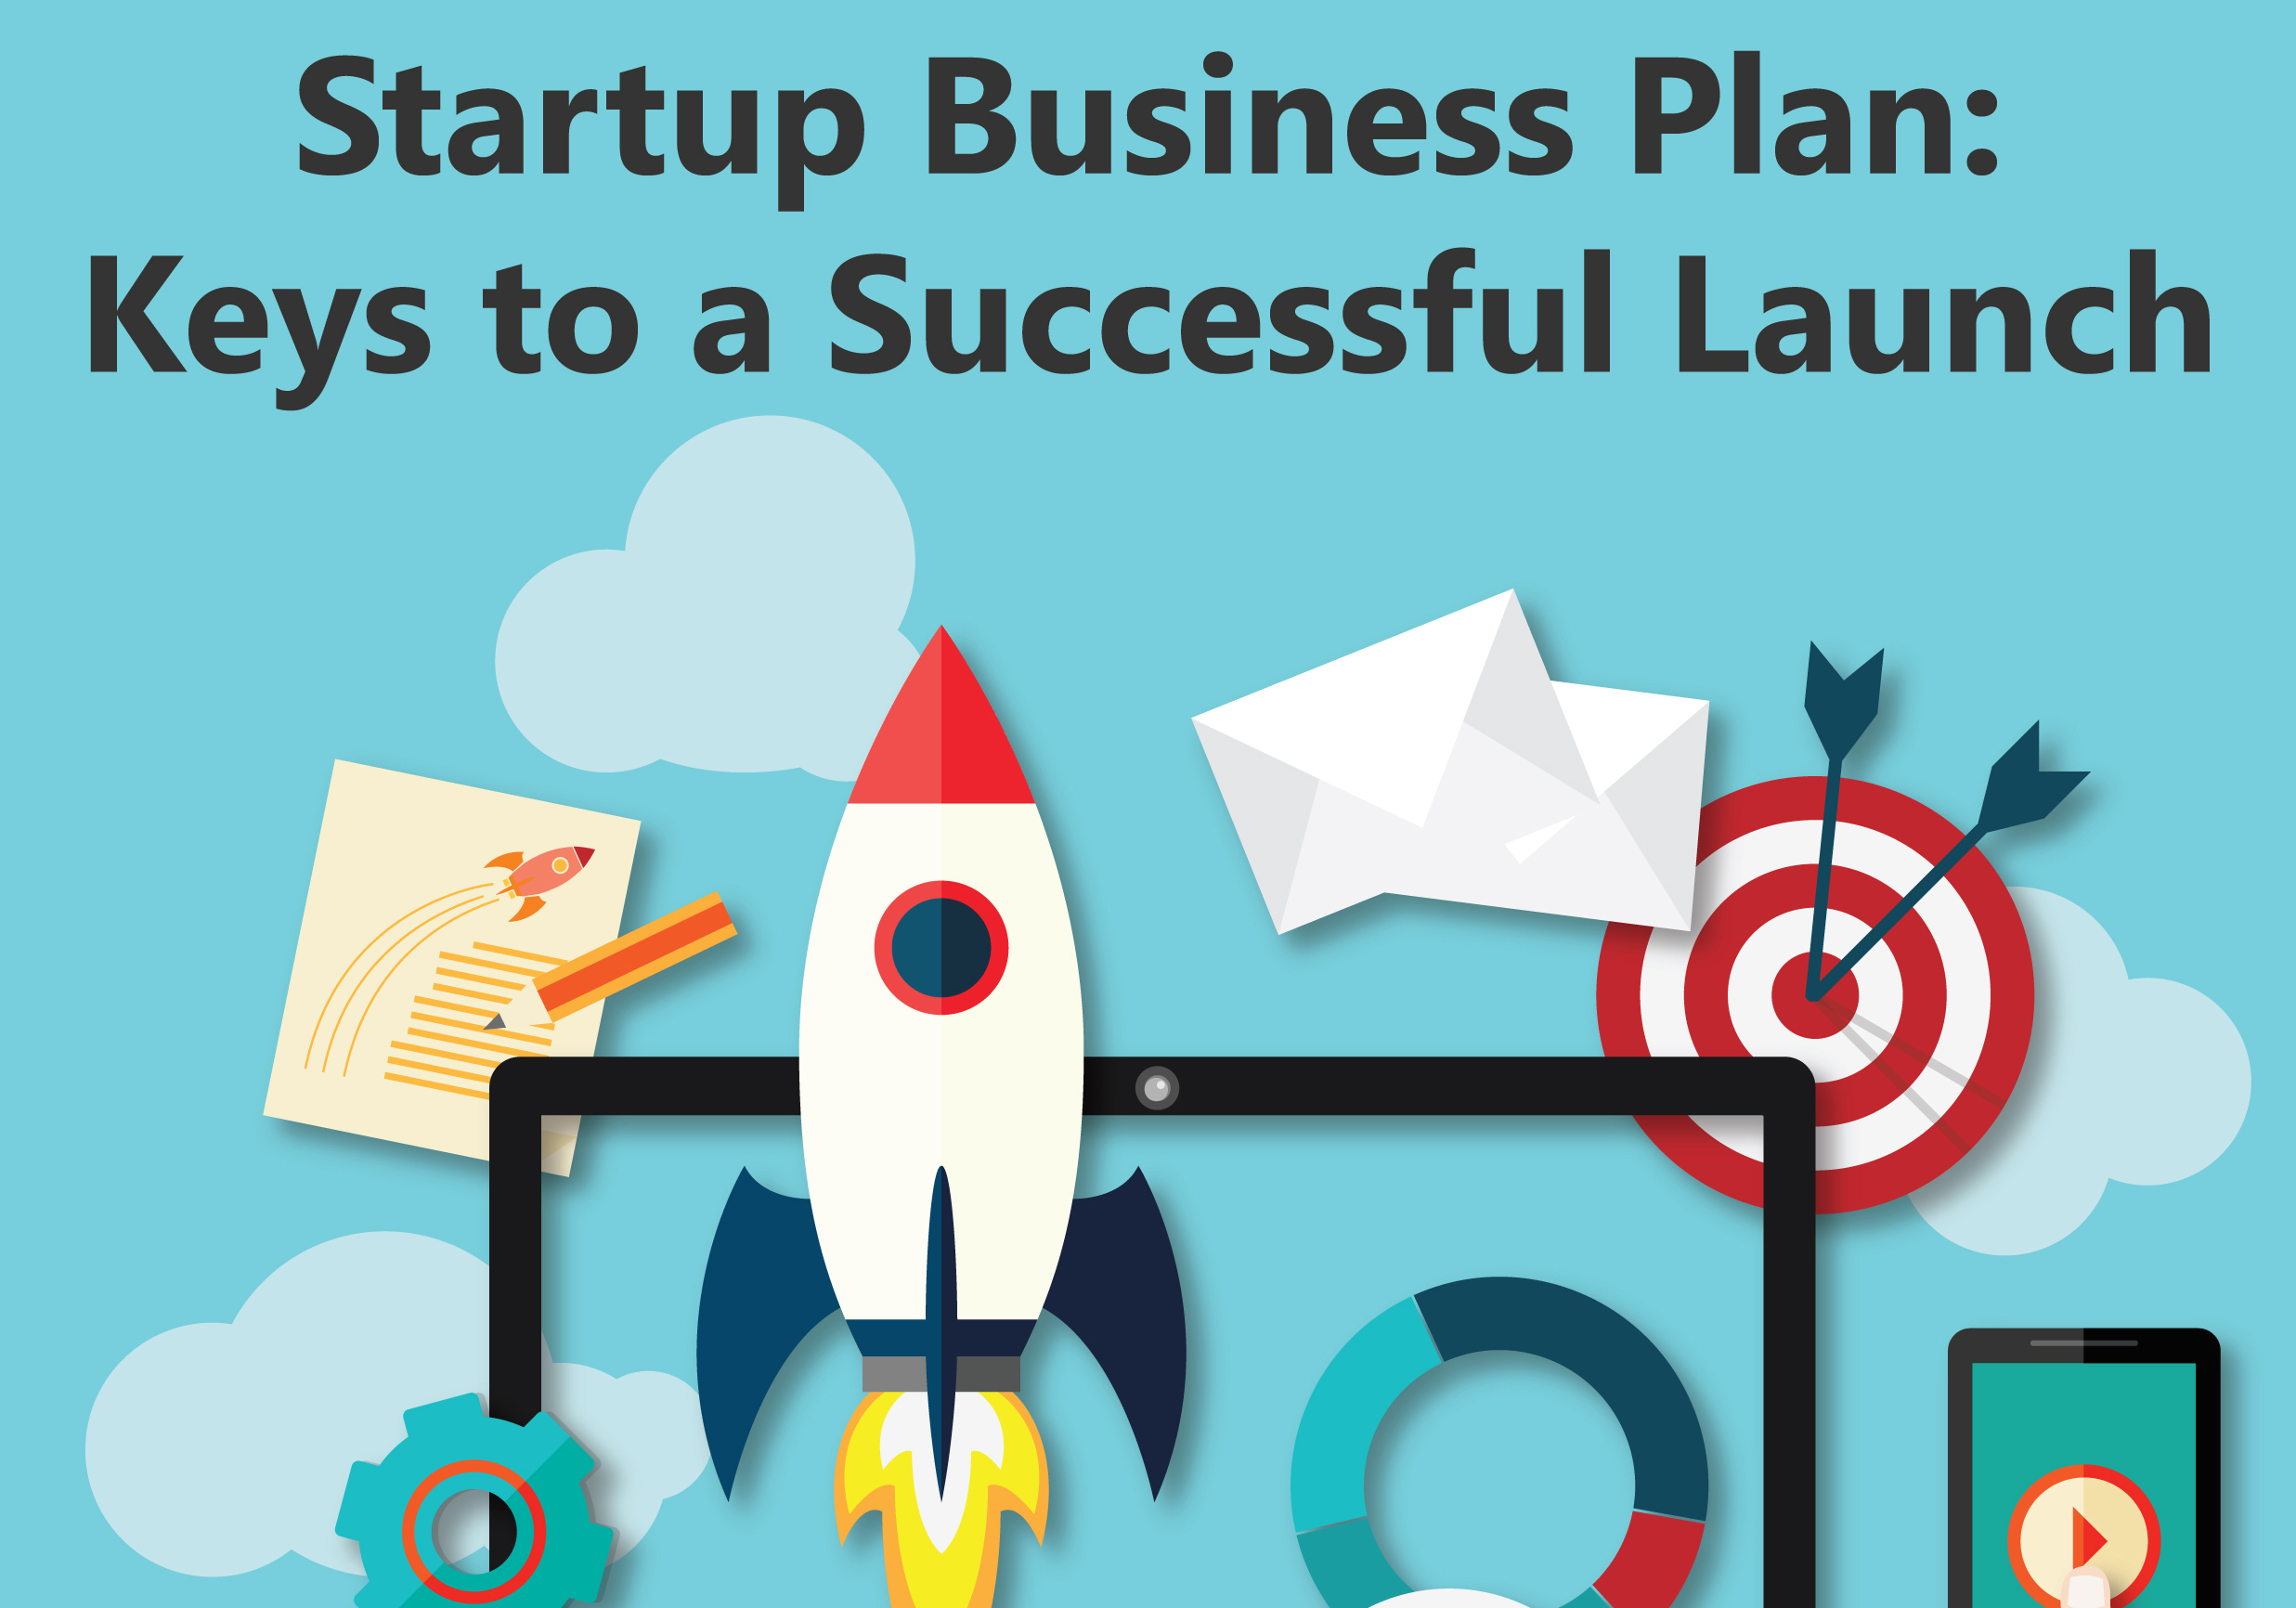 Startup Business Plan Keys to a Successful Launch